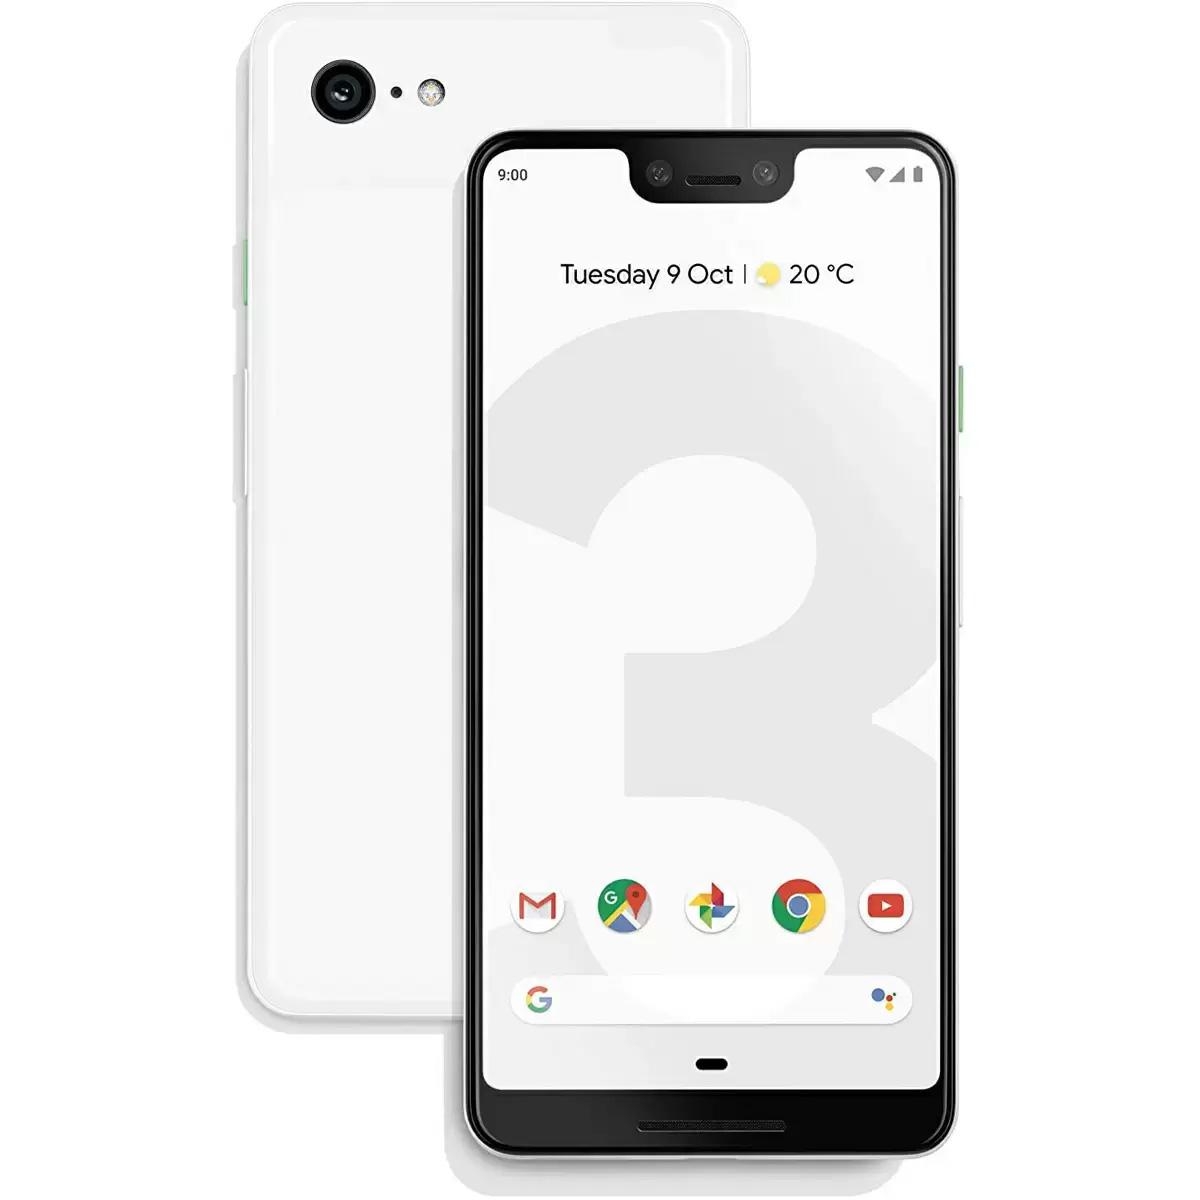 Google Pixel 3 Unlocked Smartphone for $89.99 Shipped